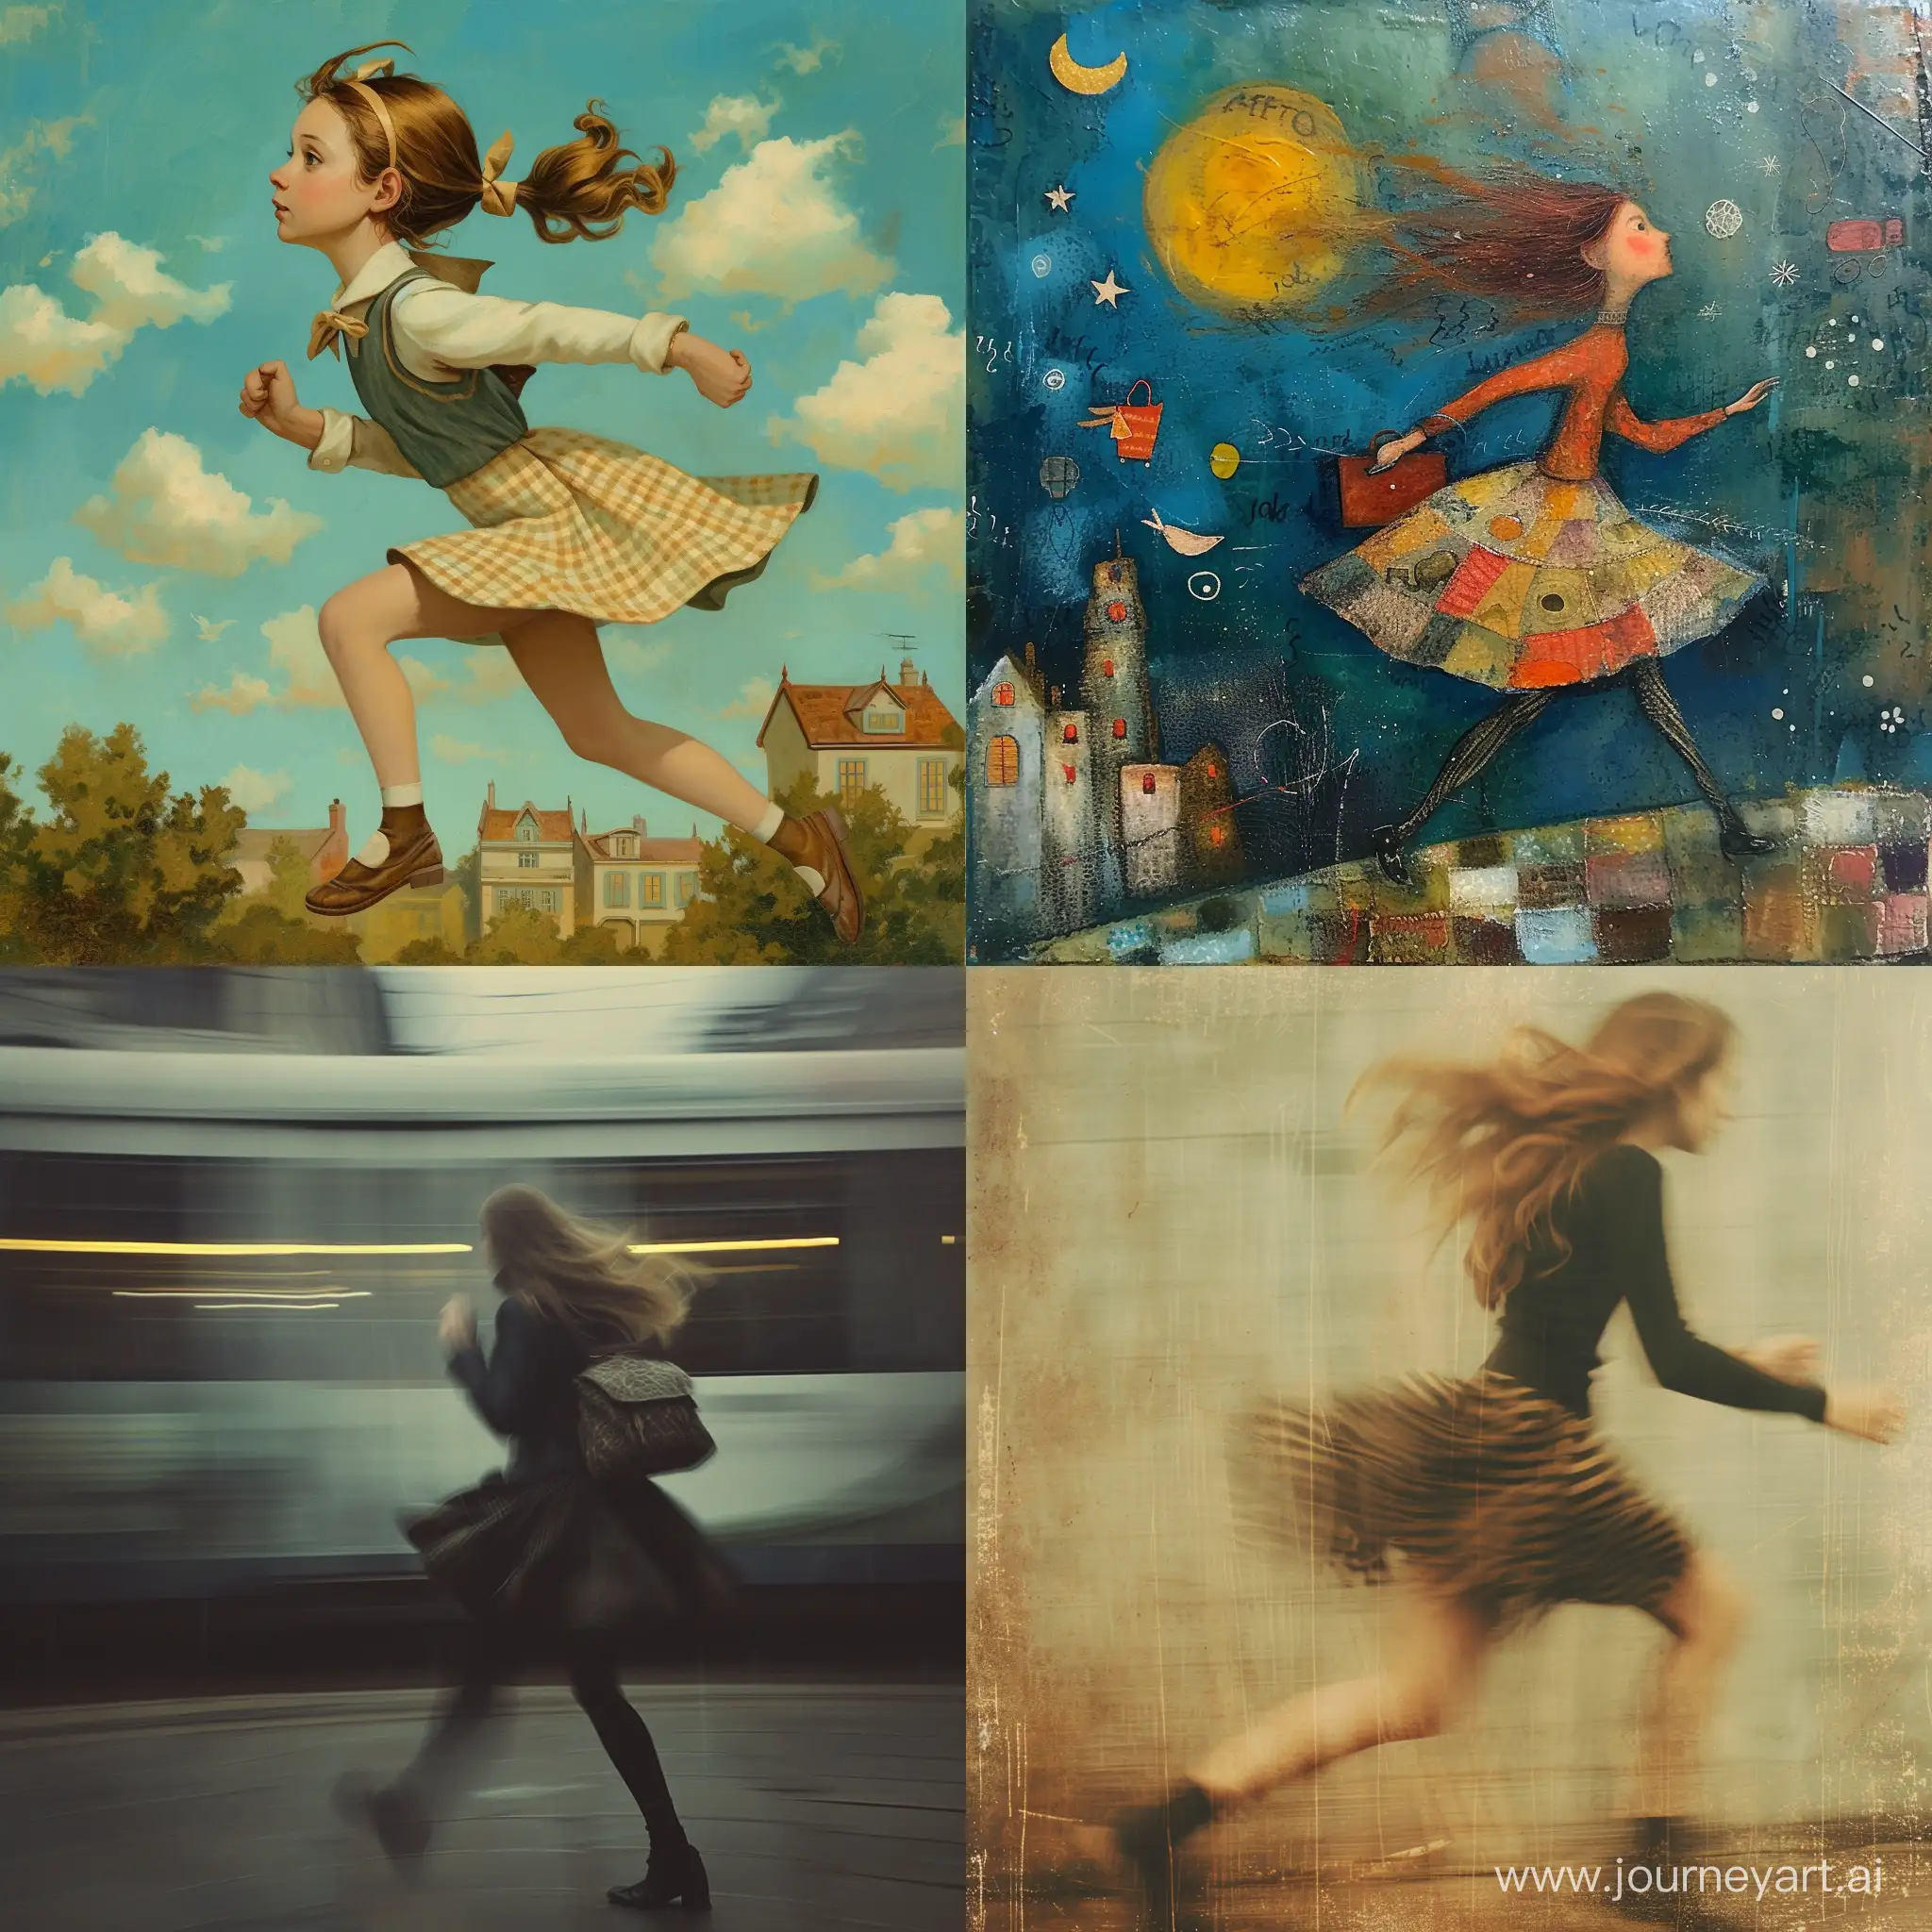 Energetic-Girl-in-a-Rush-Vibrant-Square-Composition